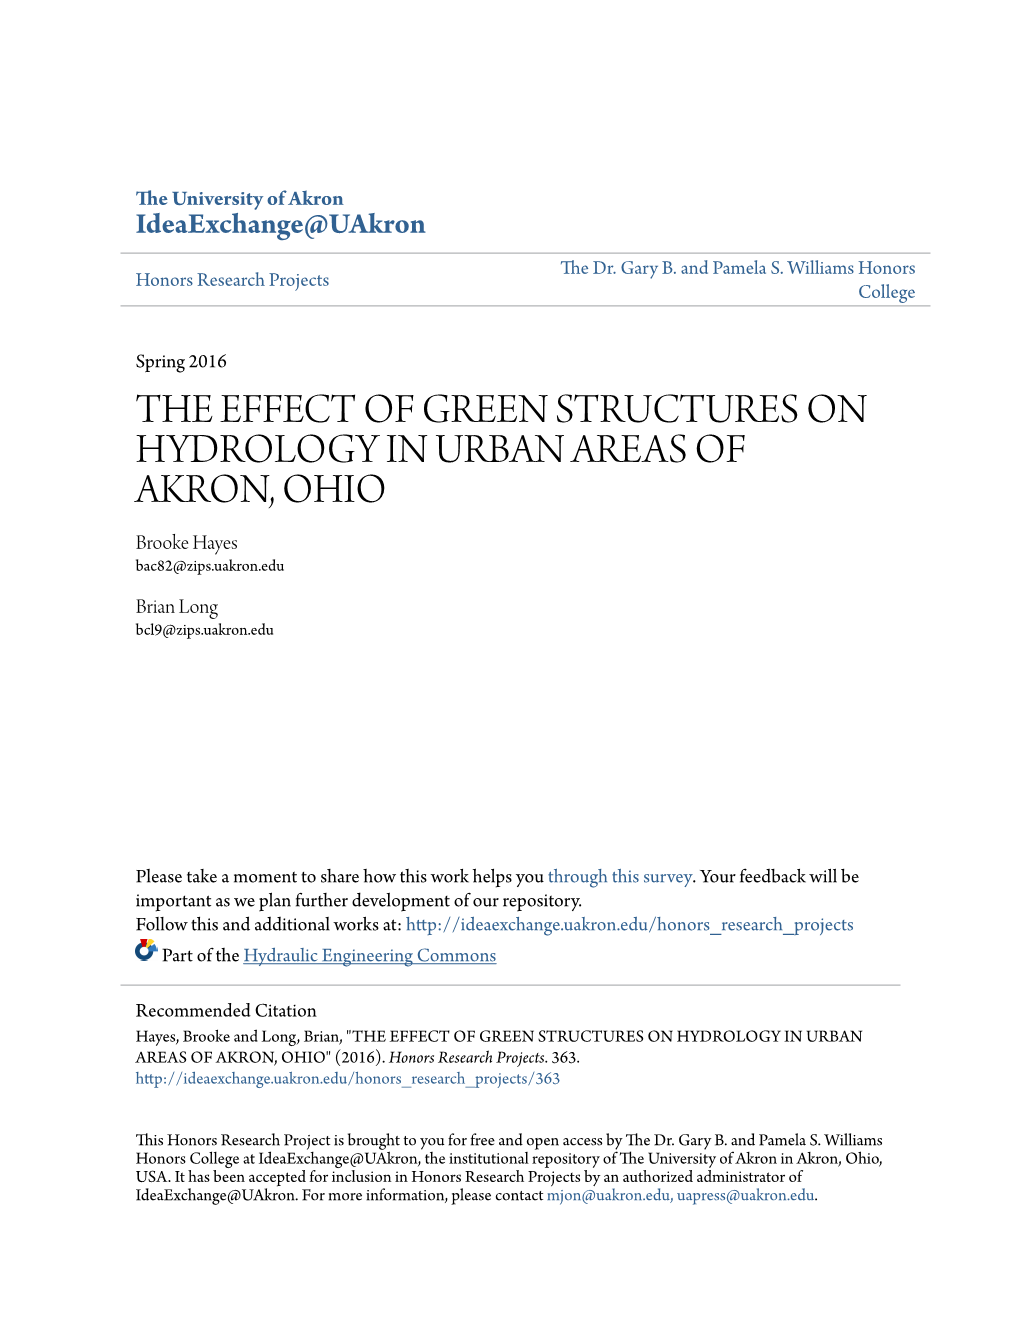 THE EFFECT of GREEN STRUCTURES on HYDROLOGY in URBAN AREAS of AKRON, OHIO Brooke Hayes Bac82@Zips.Uakron.Edu